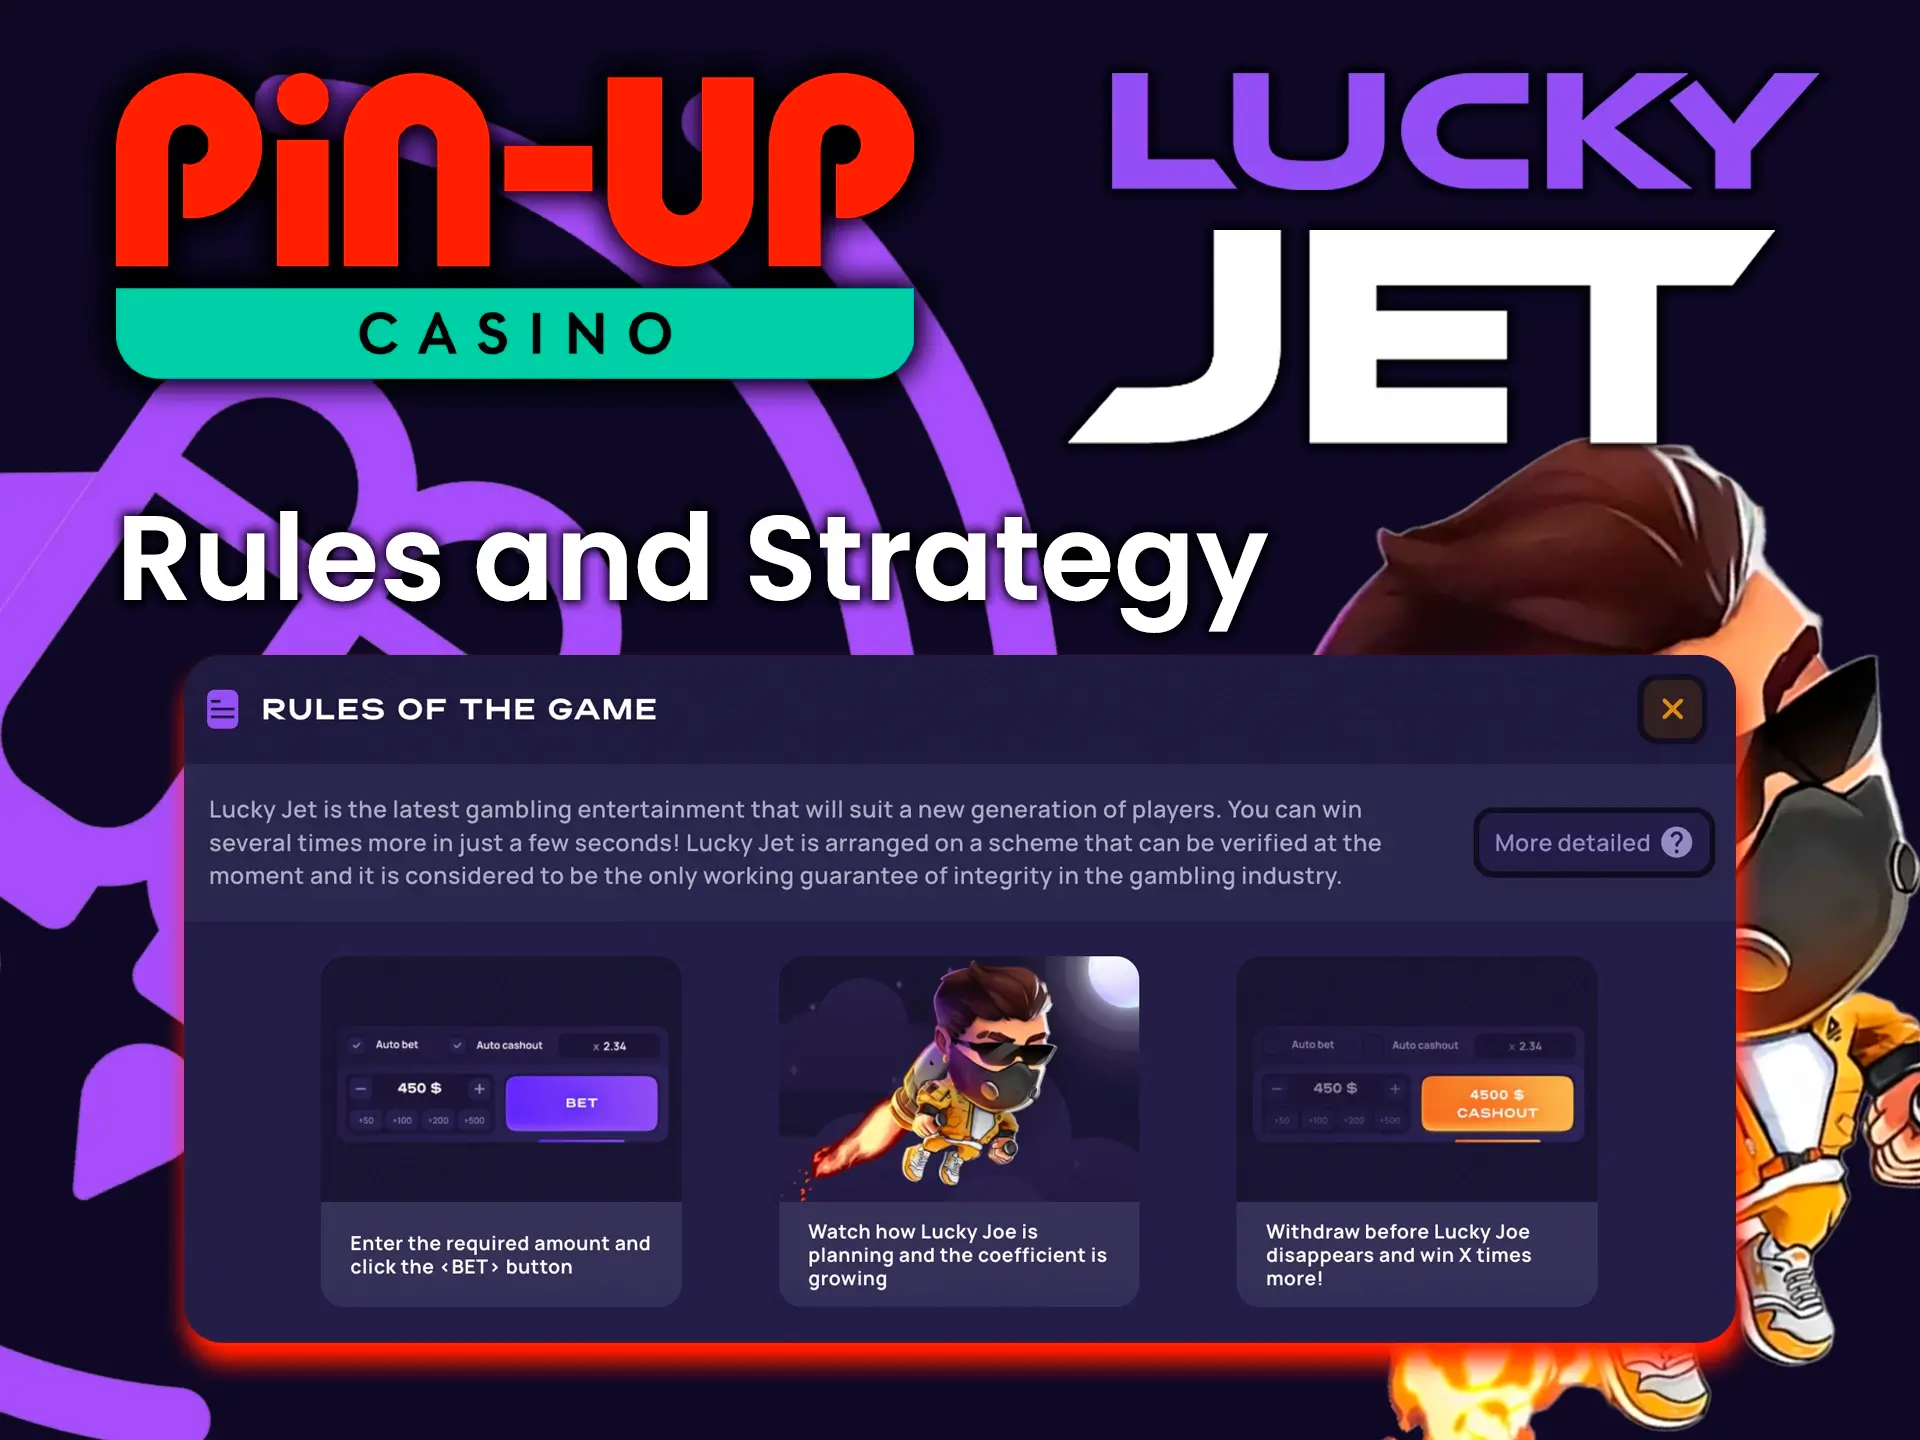 Learn the rules of Lucky Jet on Pin Up.